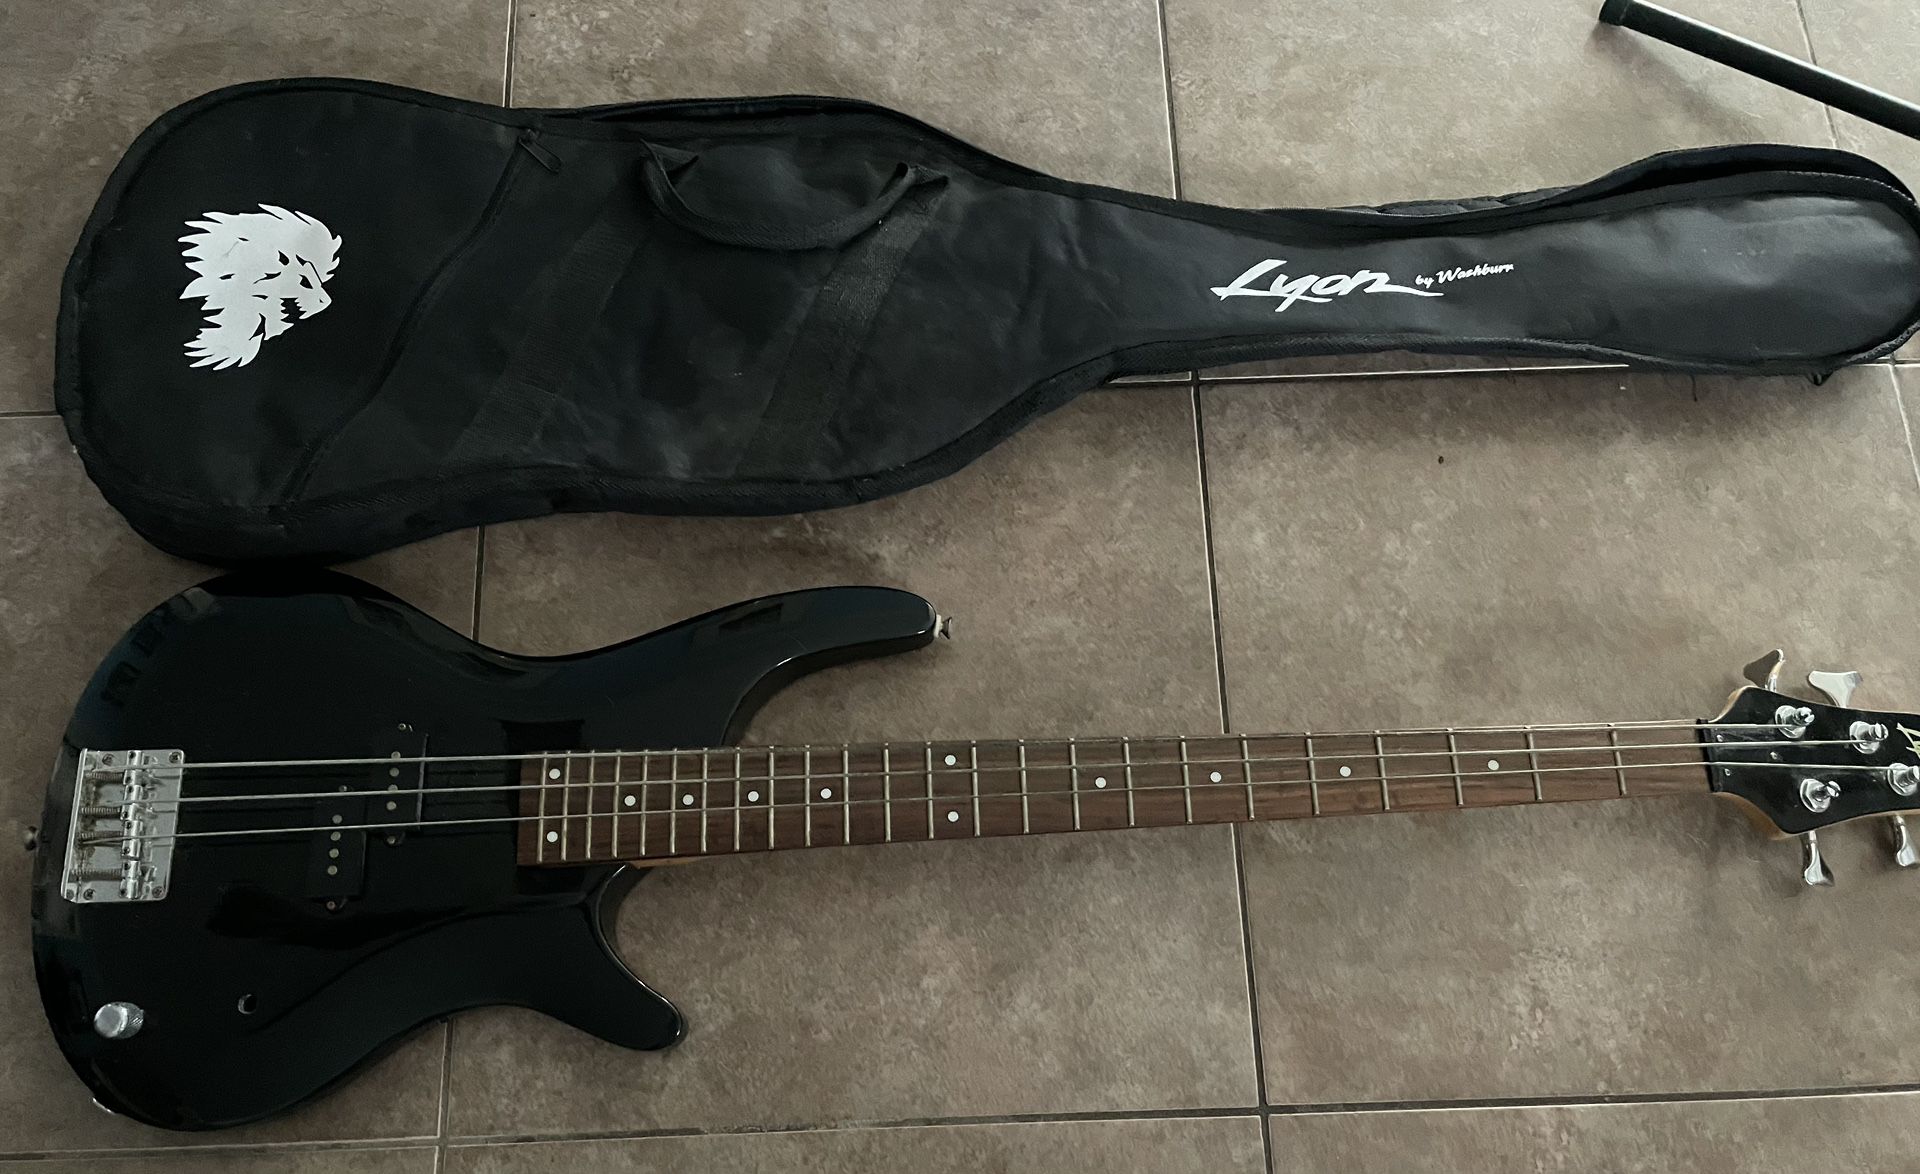 Lyon by Washburn 4 String Electric Bass Guitar in Black with case and stand. As is. See photos. Great overall condition